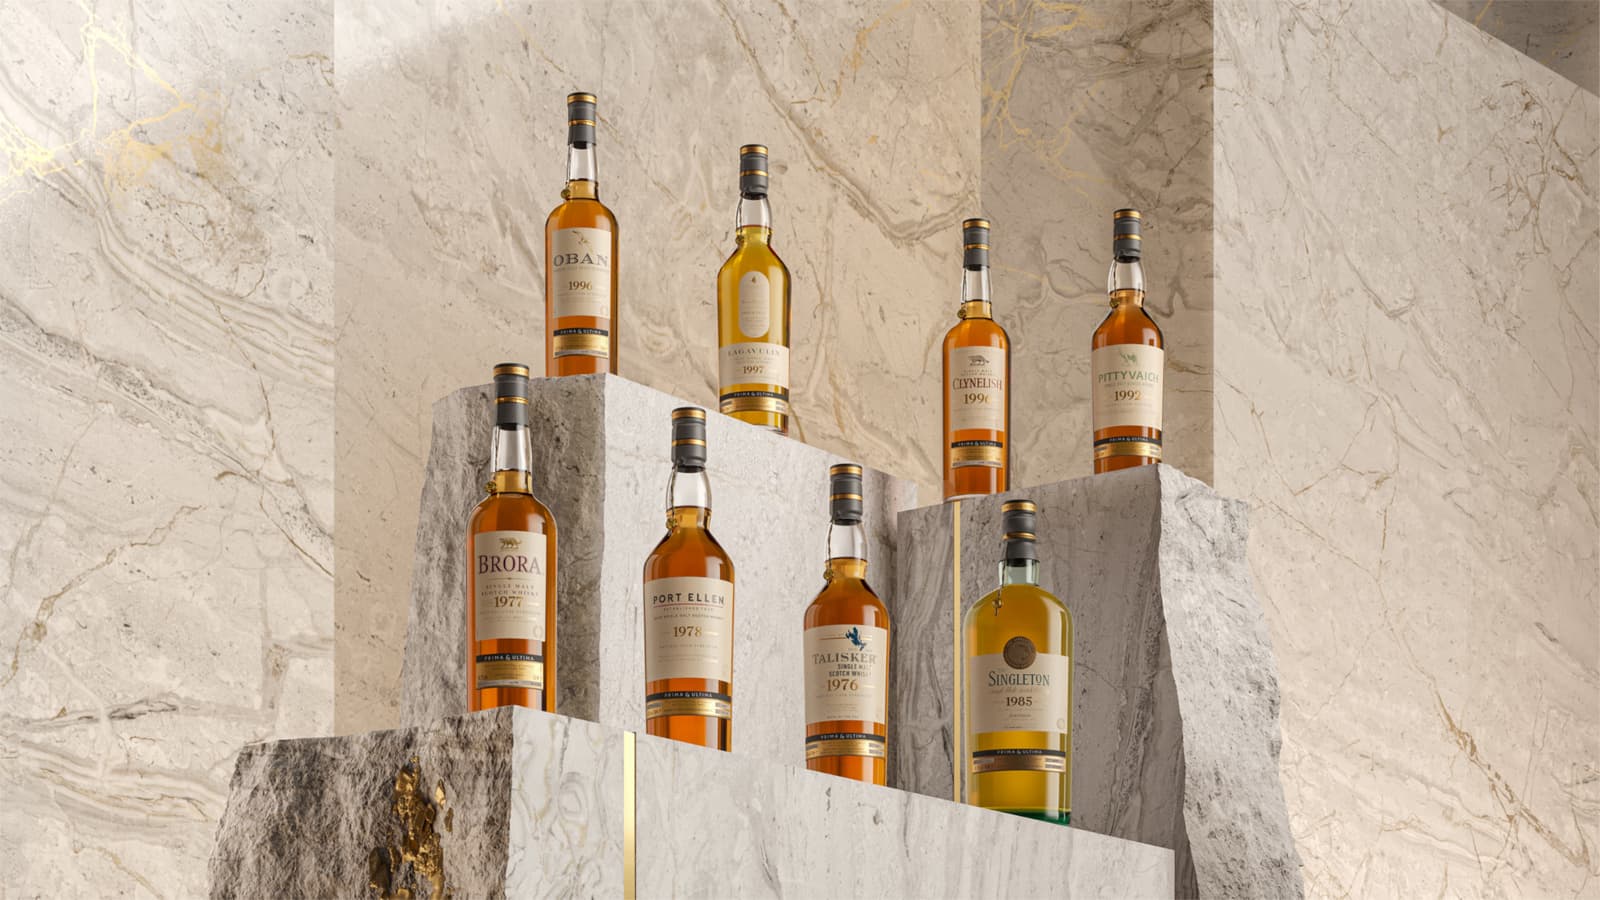 The Prima & Ultima Fourth Release complete collection of rare whiskies